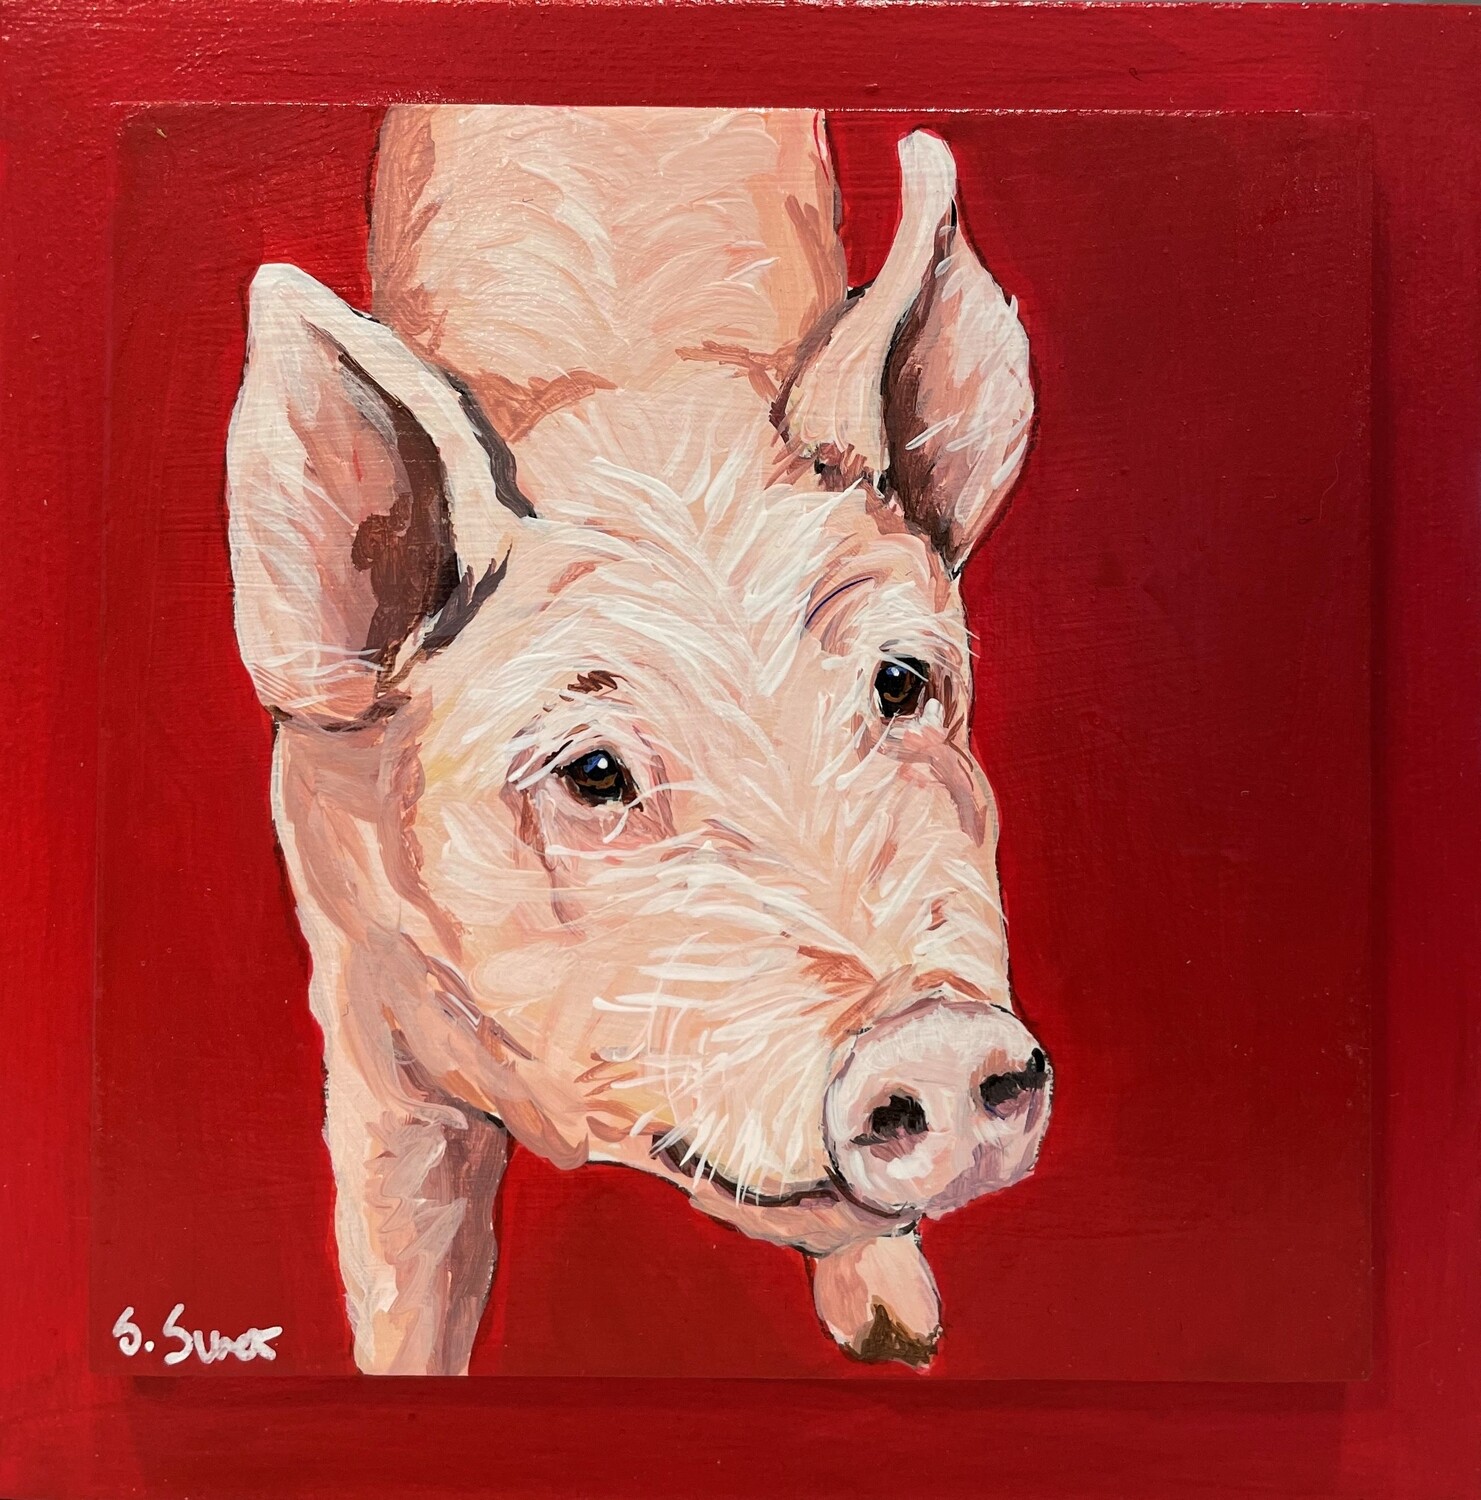 Richard the Pig on Red 